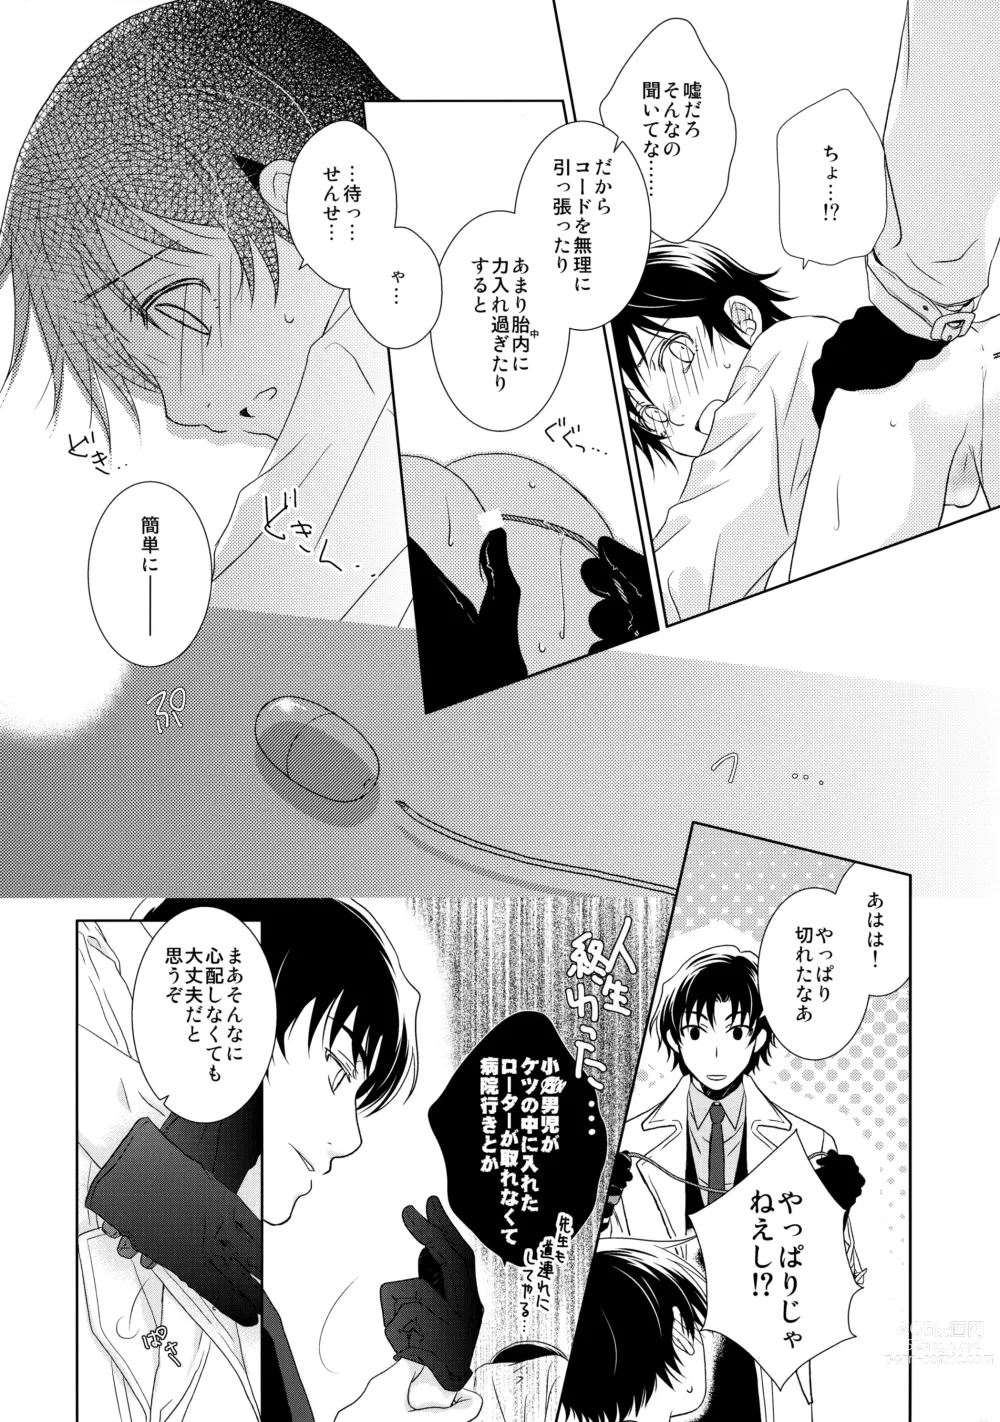 Page 7 of doujinshi Butterfield 8